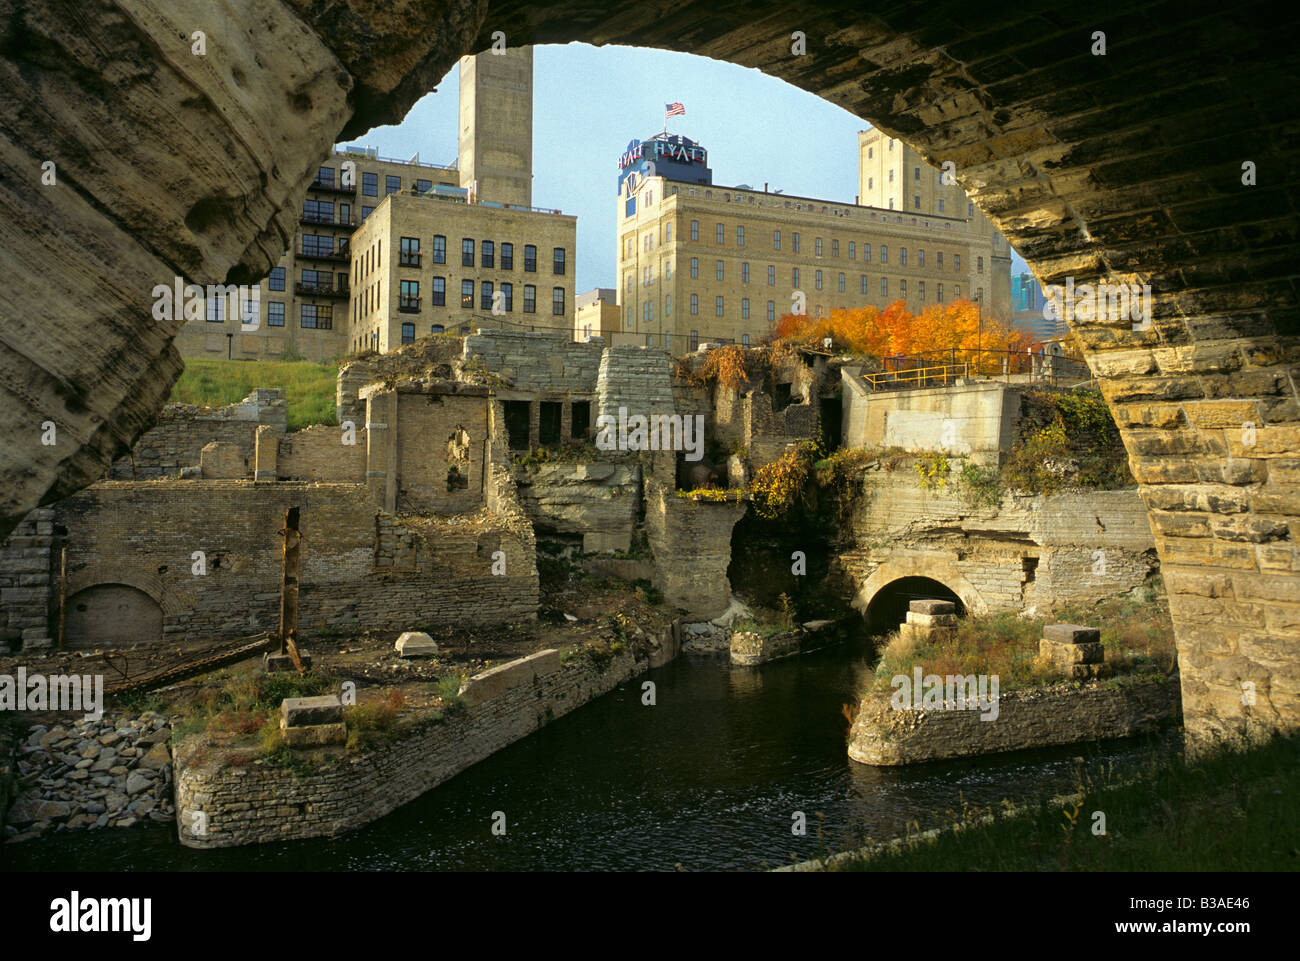 VIEW OF MILL RUINS PARK THROUGH STONE ARCH BRIDGE AND MISSISSIPPI RIVER IN DOWNTOWN MINNEAPOLIS, MINNESOTA.  FALL. Stock Photo